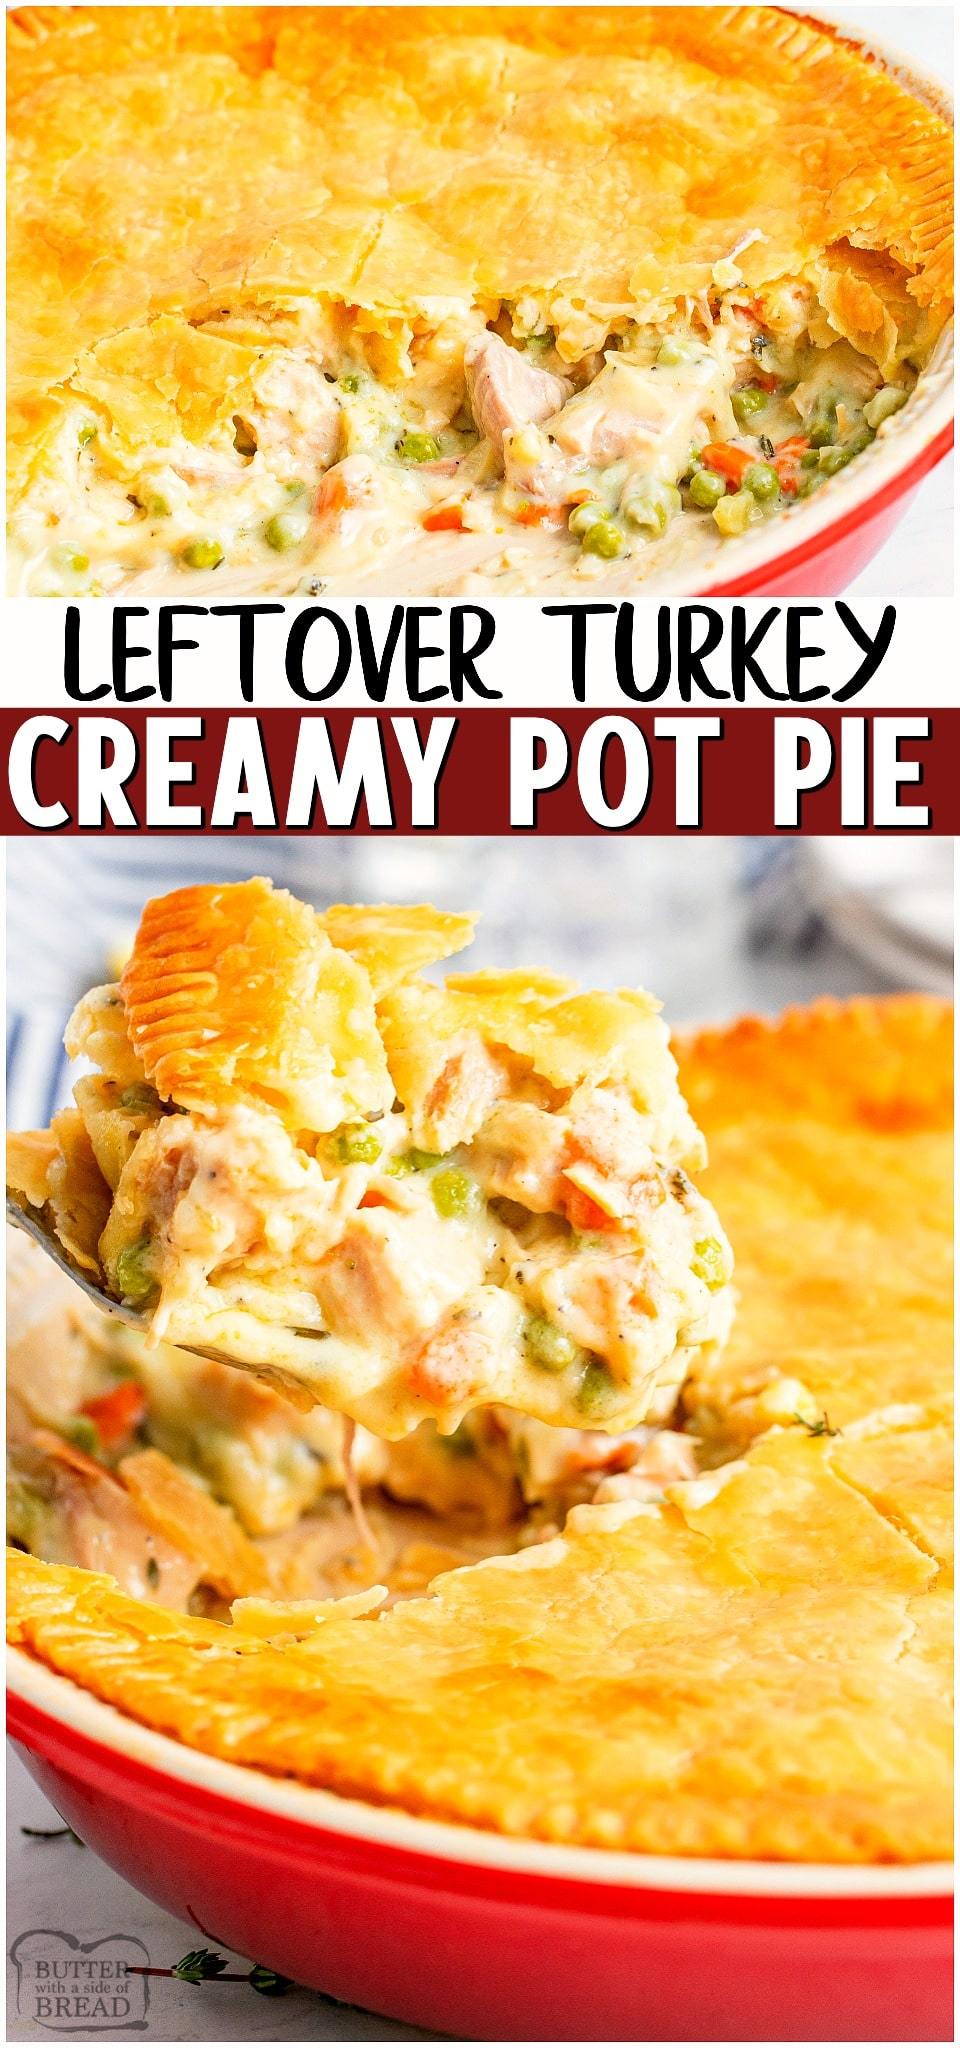 Turkey pot pie made with tender bits of turkey & vegetables in a creamy gravy topped with a crisp golden pie crust. Easy comfort food recipe to make that's perfect for using up leftover turkey! #turkey #leftover #potpie #comfortfood #easydinner #easyrecipe from BUTTER WITH A SIDE OF BREAD